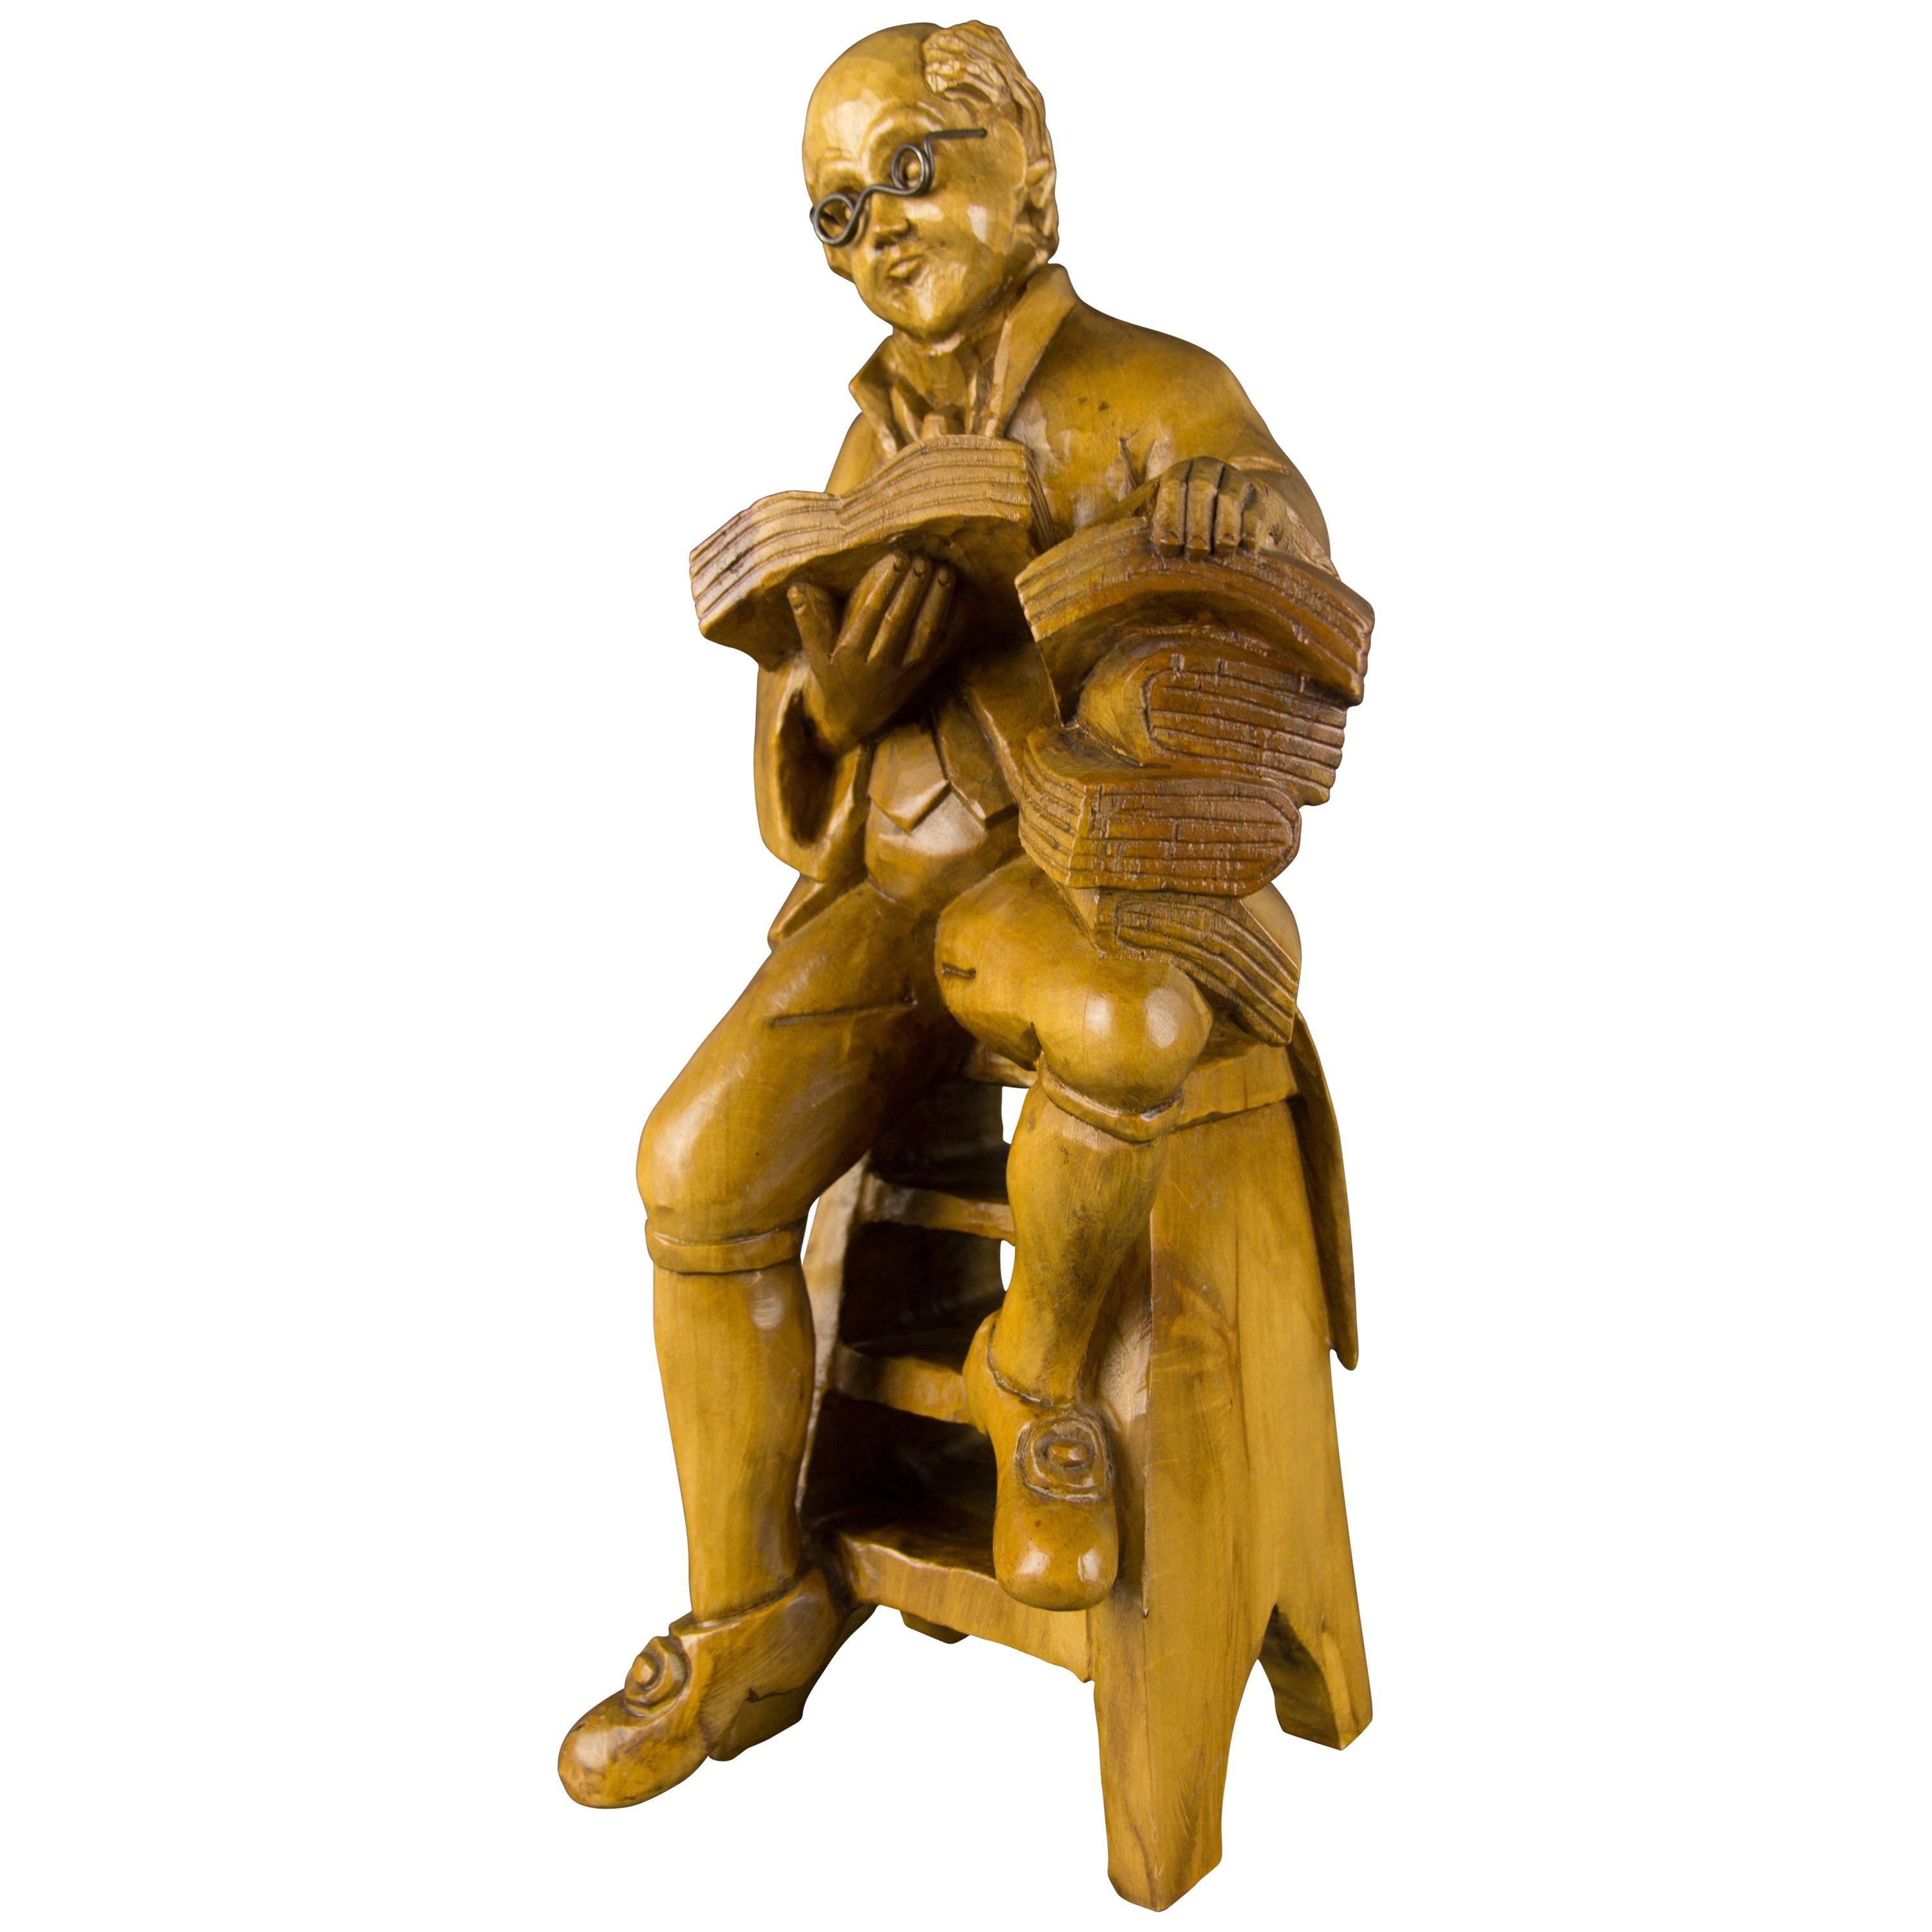 Hand Carved Wooden Figurative Sculpture of a Professor with Books